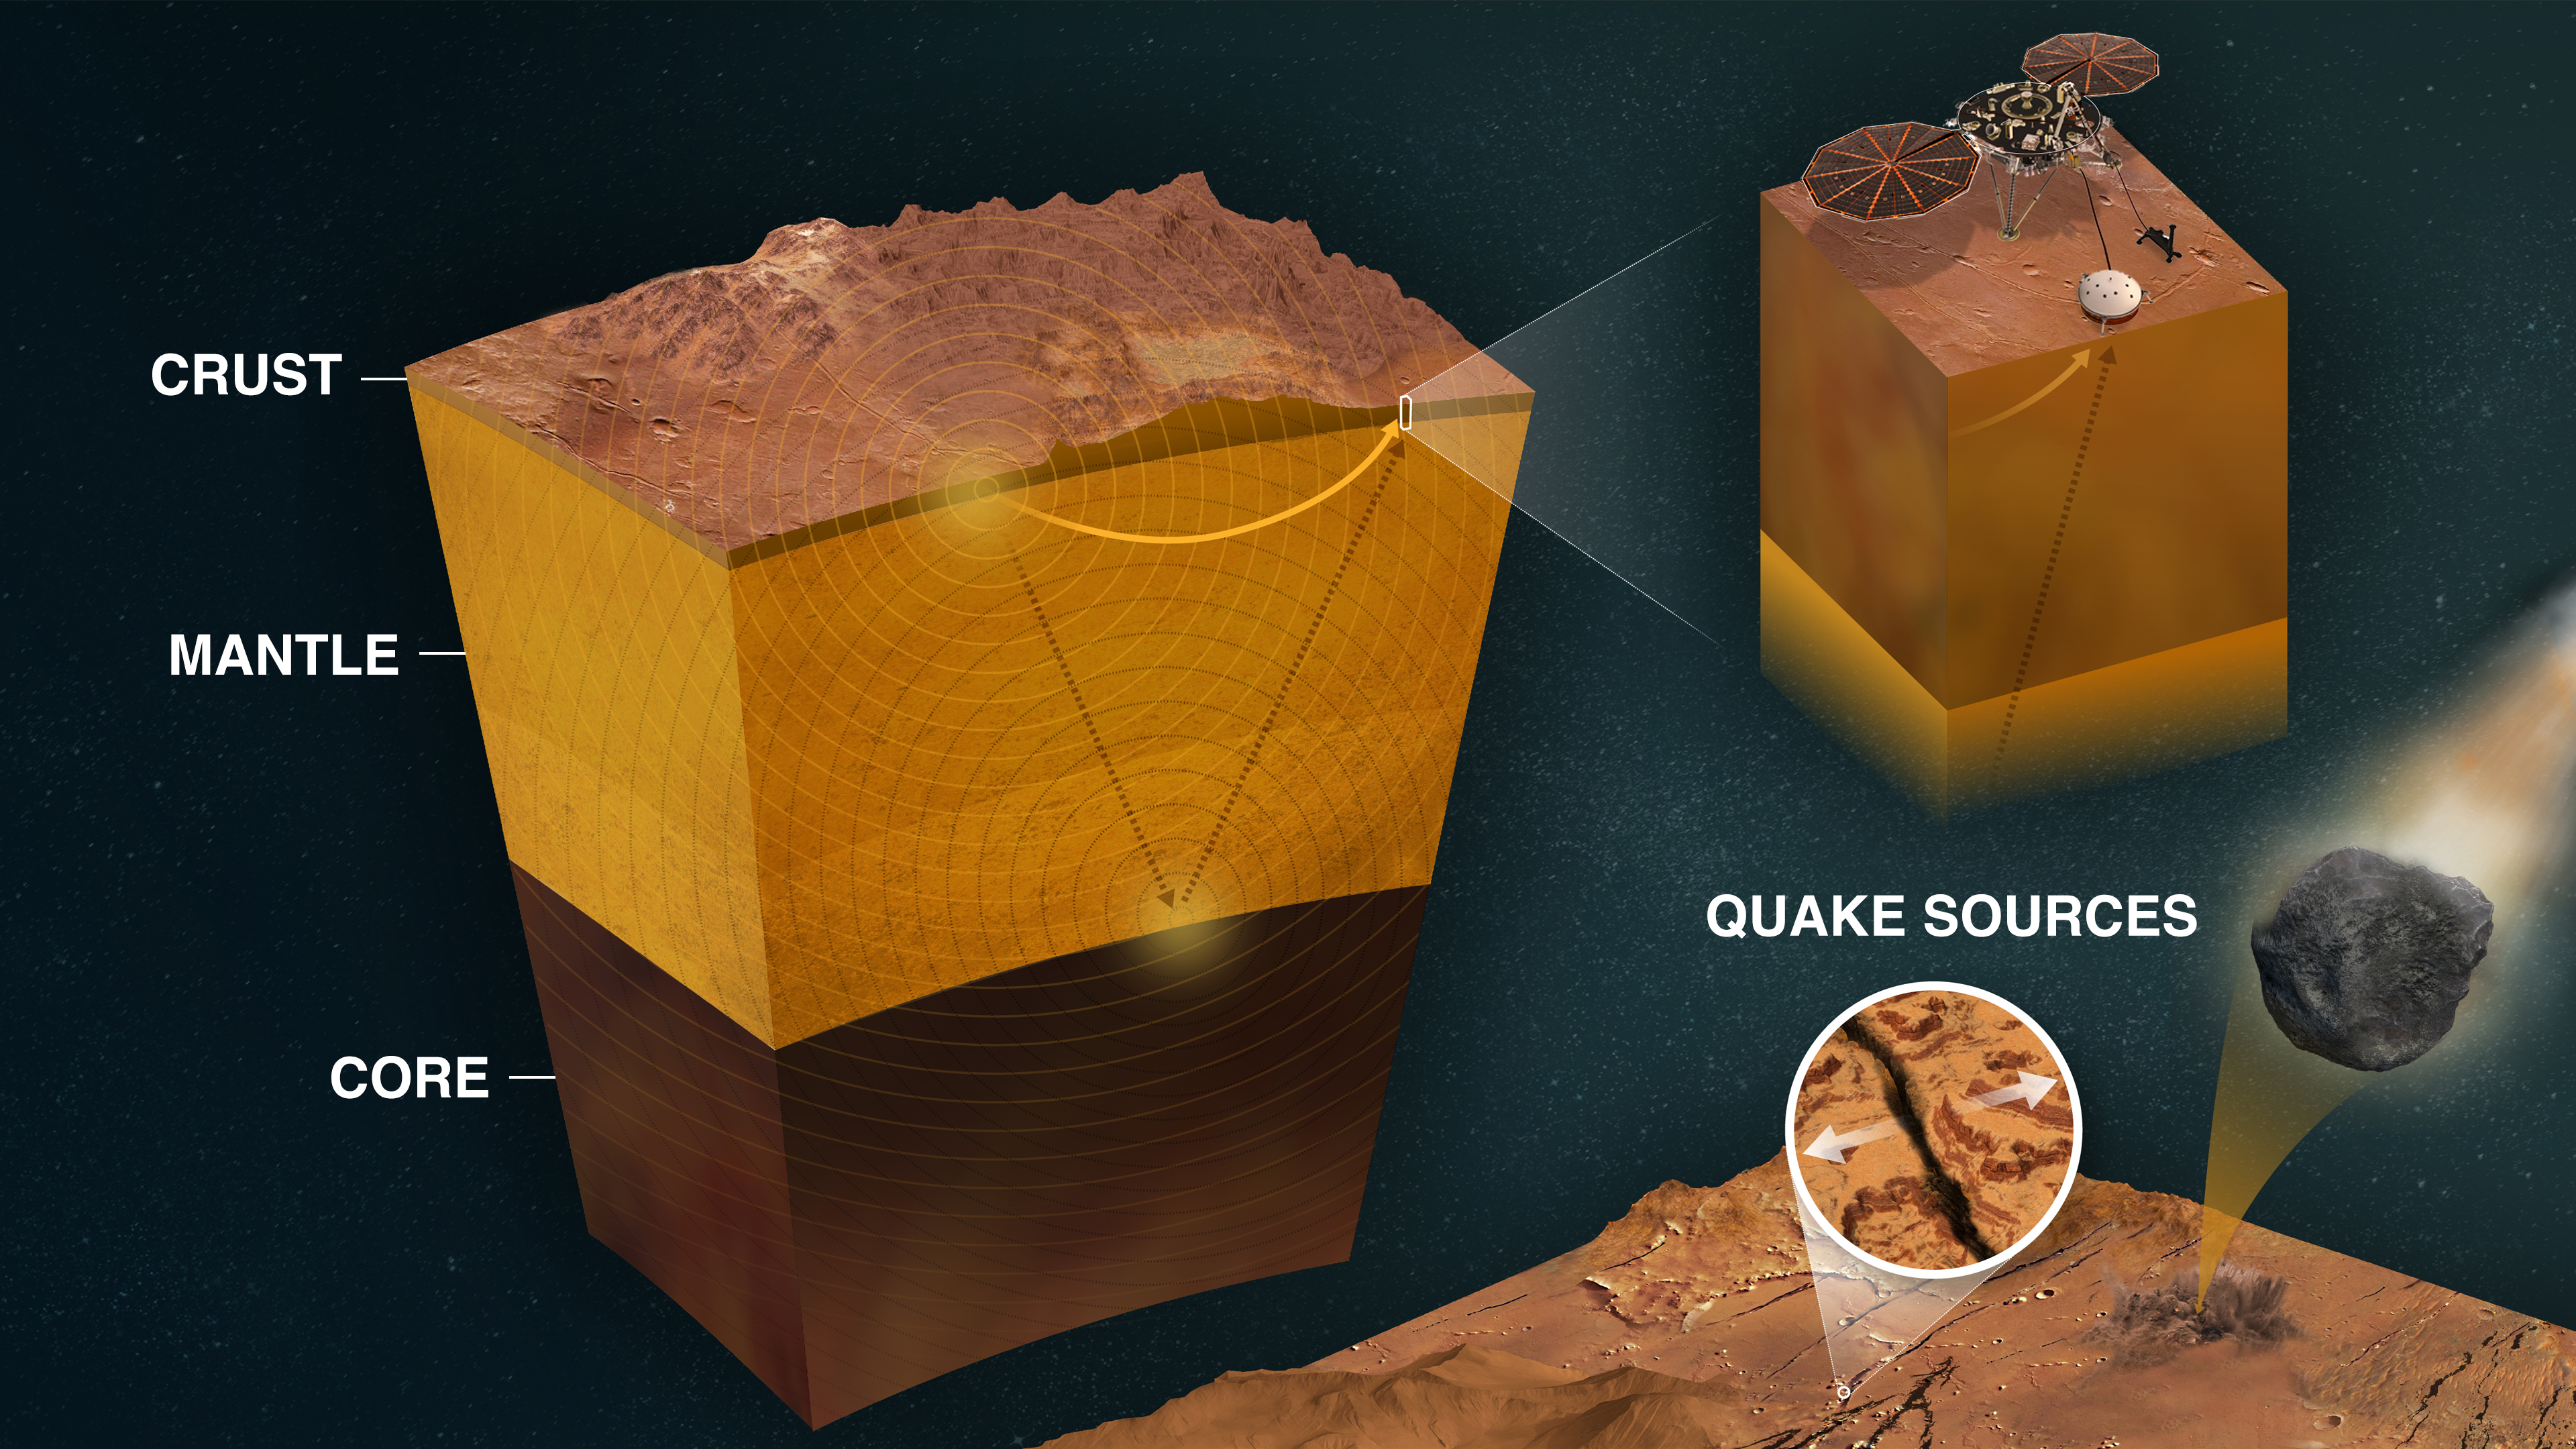 This infographic shows those layers, and how InSight uses quakes to study them. It also shows a close-up of InSight and the major sources of marsquakes. Most quakes are created by heat and pressure inside the planet, which cause rock to fracture; another source is meteors striking the surface.